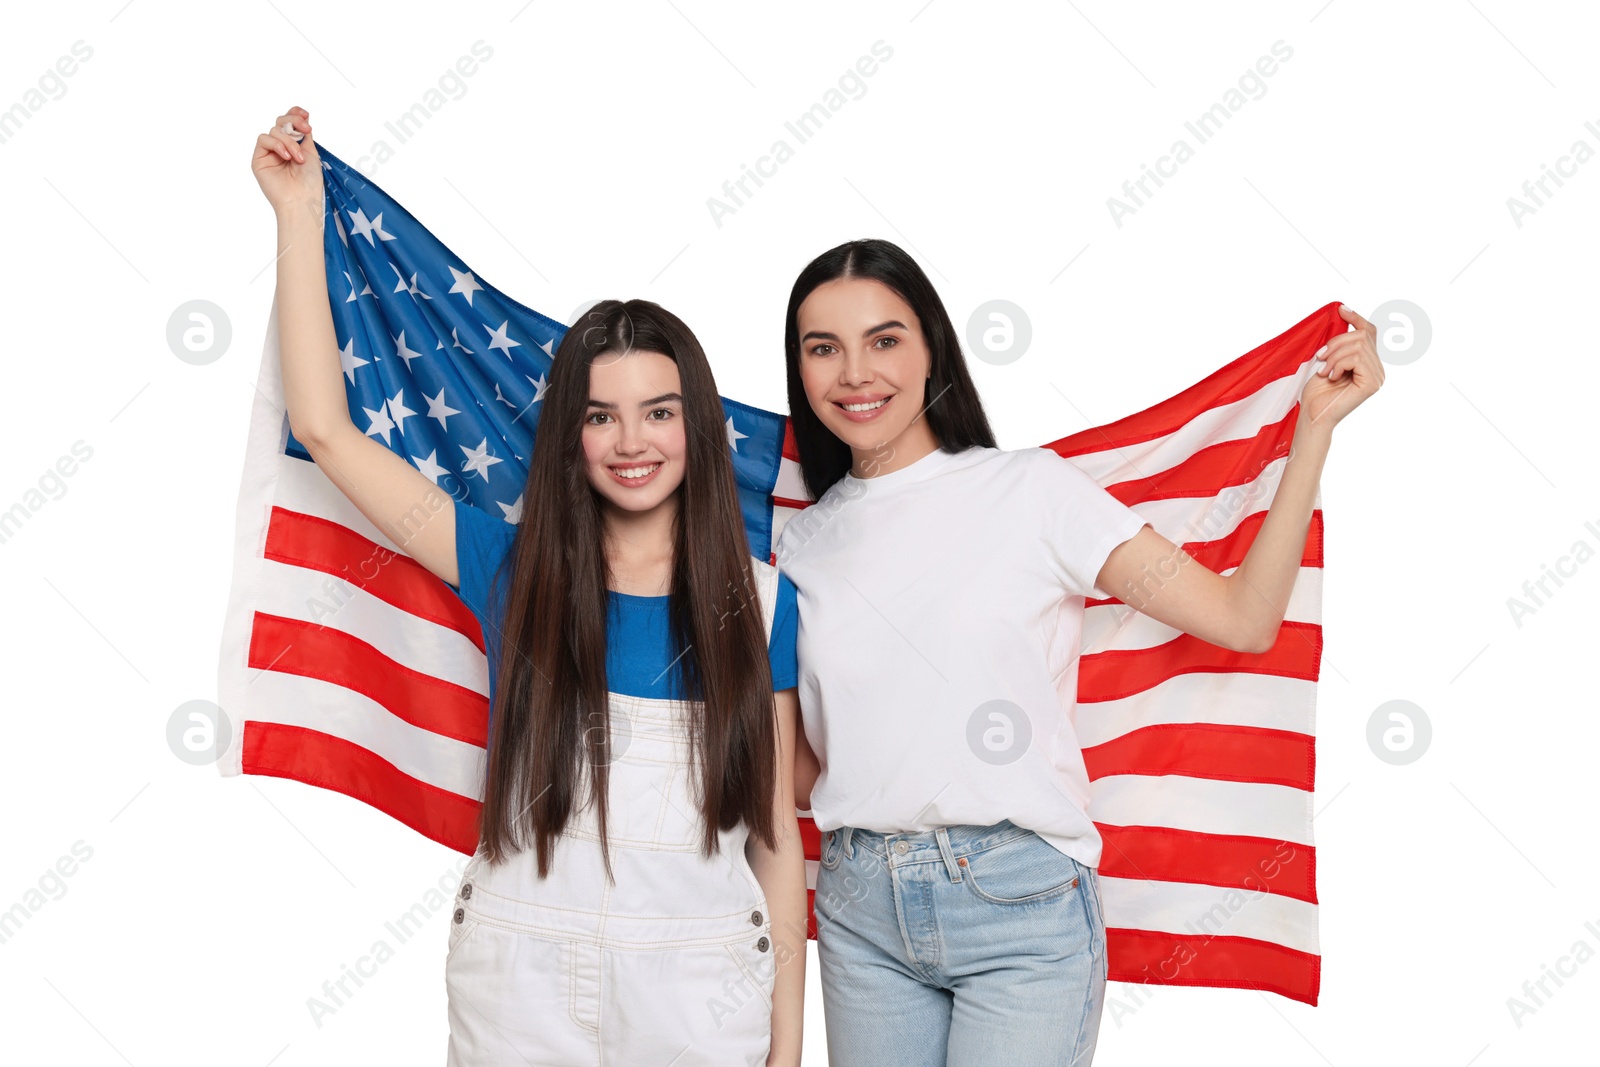 Image of 4th of July - Independence day of America. Happy mother and daughter with national flag of United States on white background